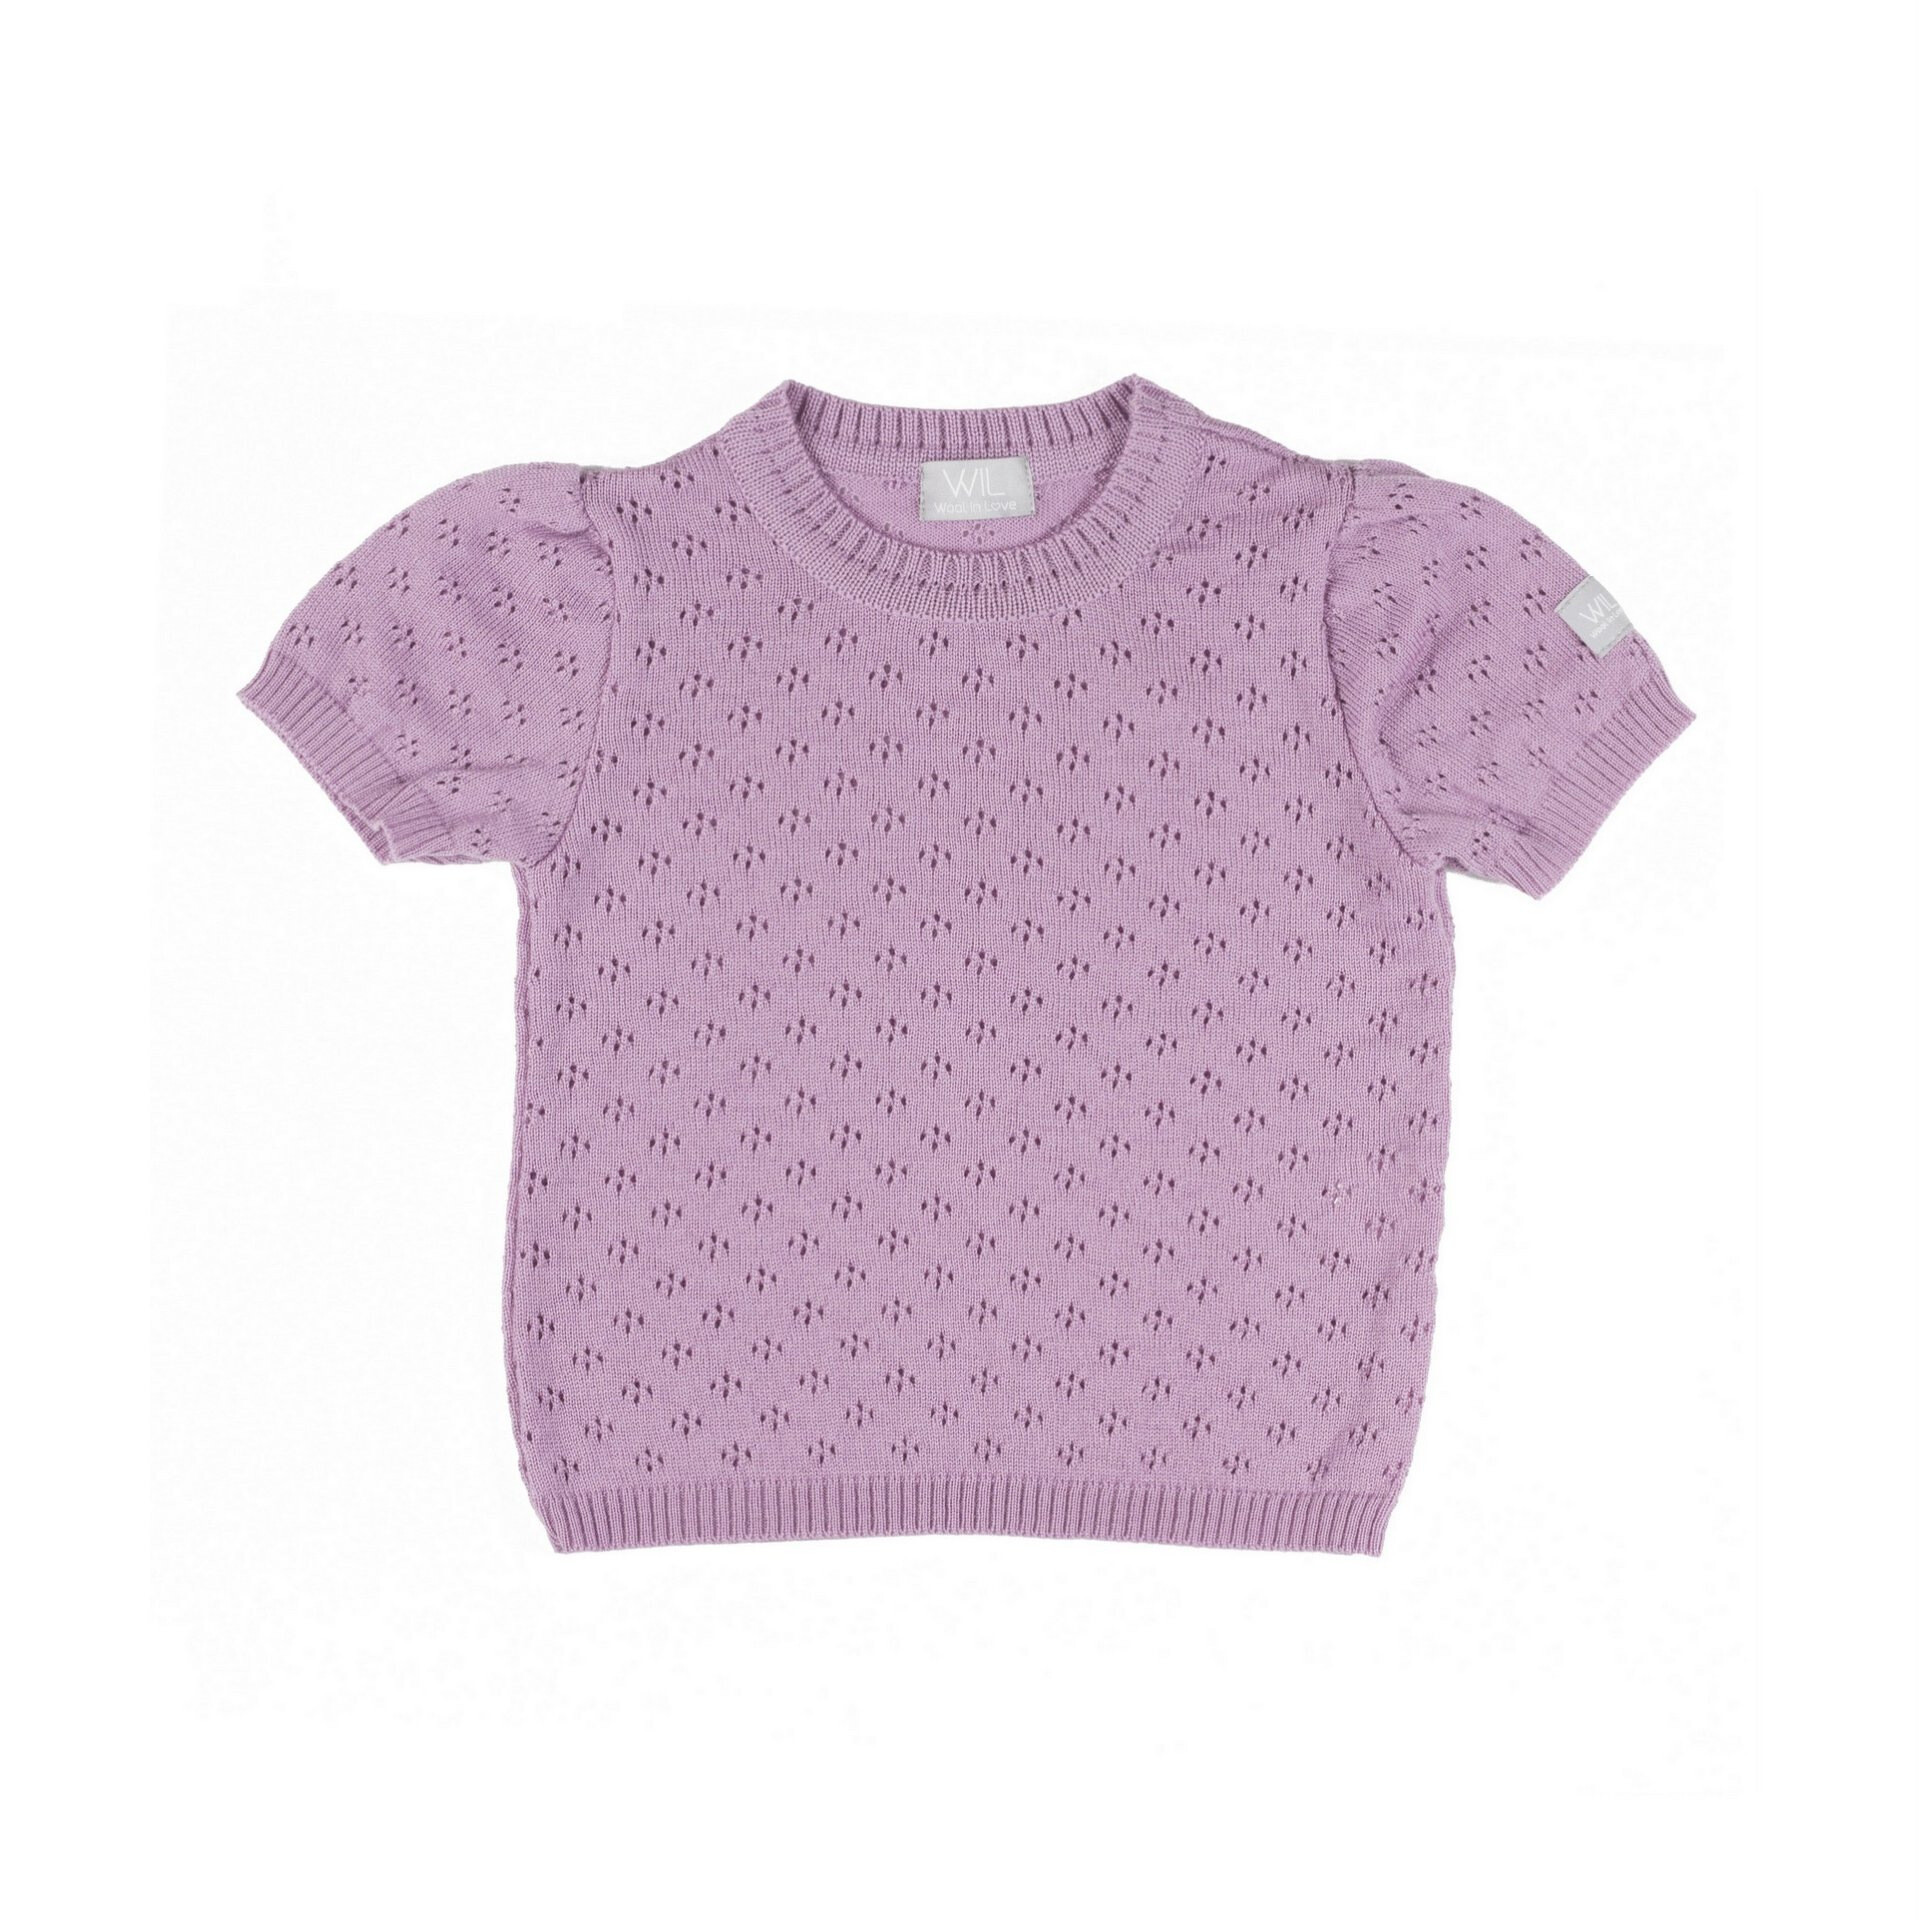 The light and cute sweater. The floral pattern is light, thin and airy.  Small sleeves are slightly puffy to add cuteness. 